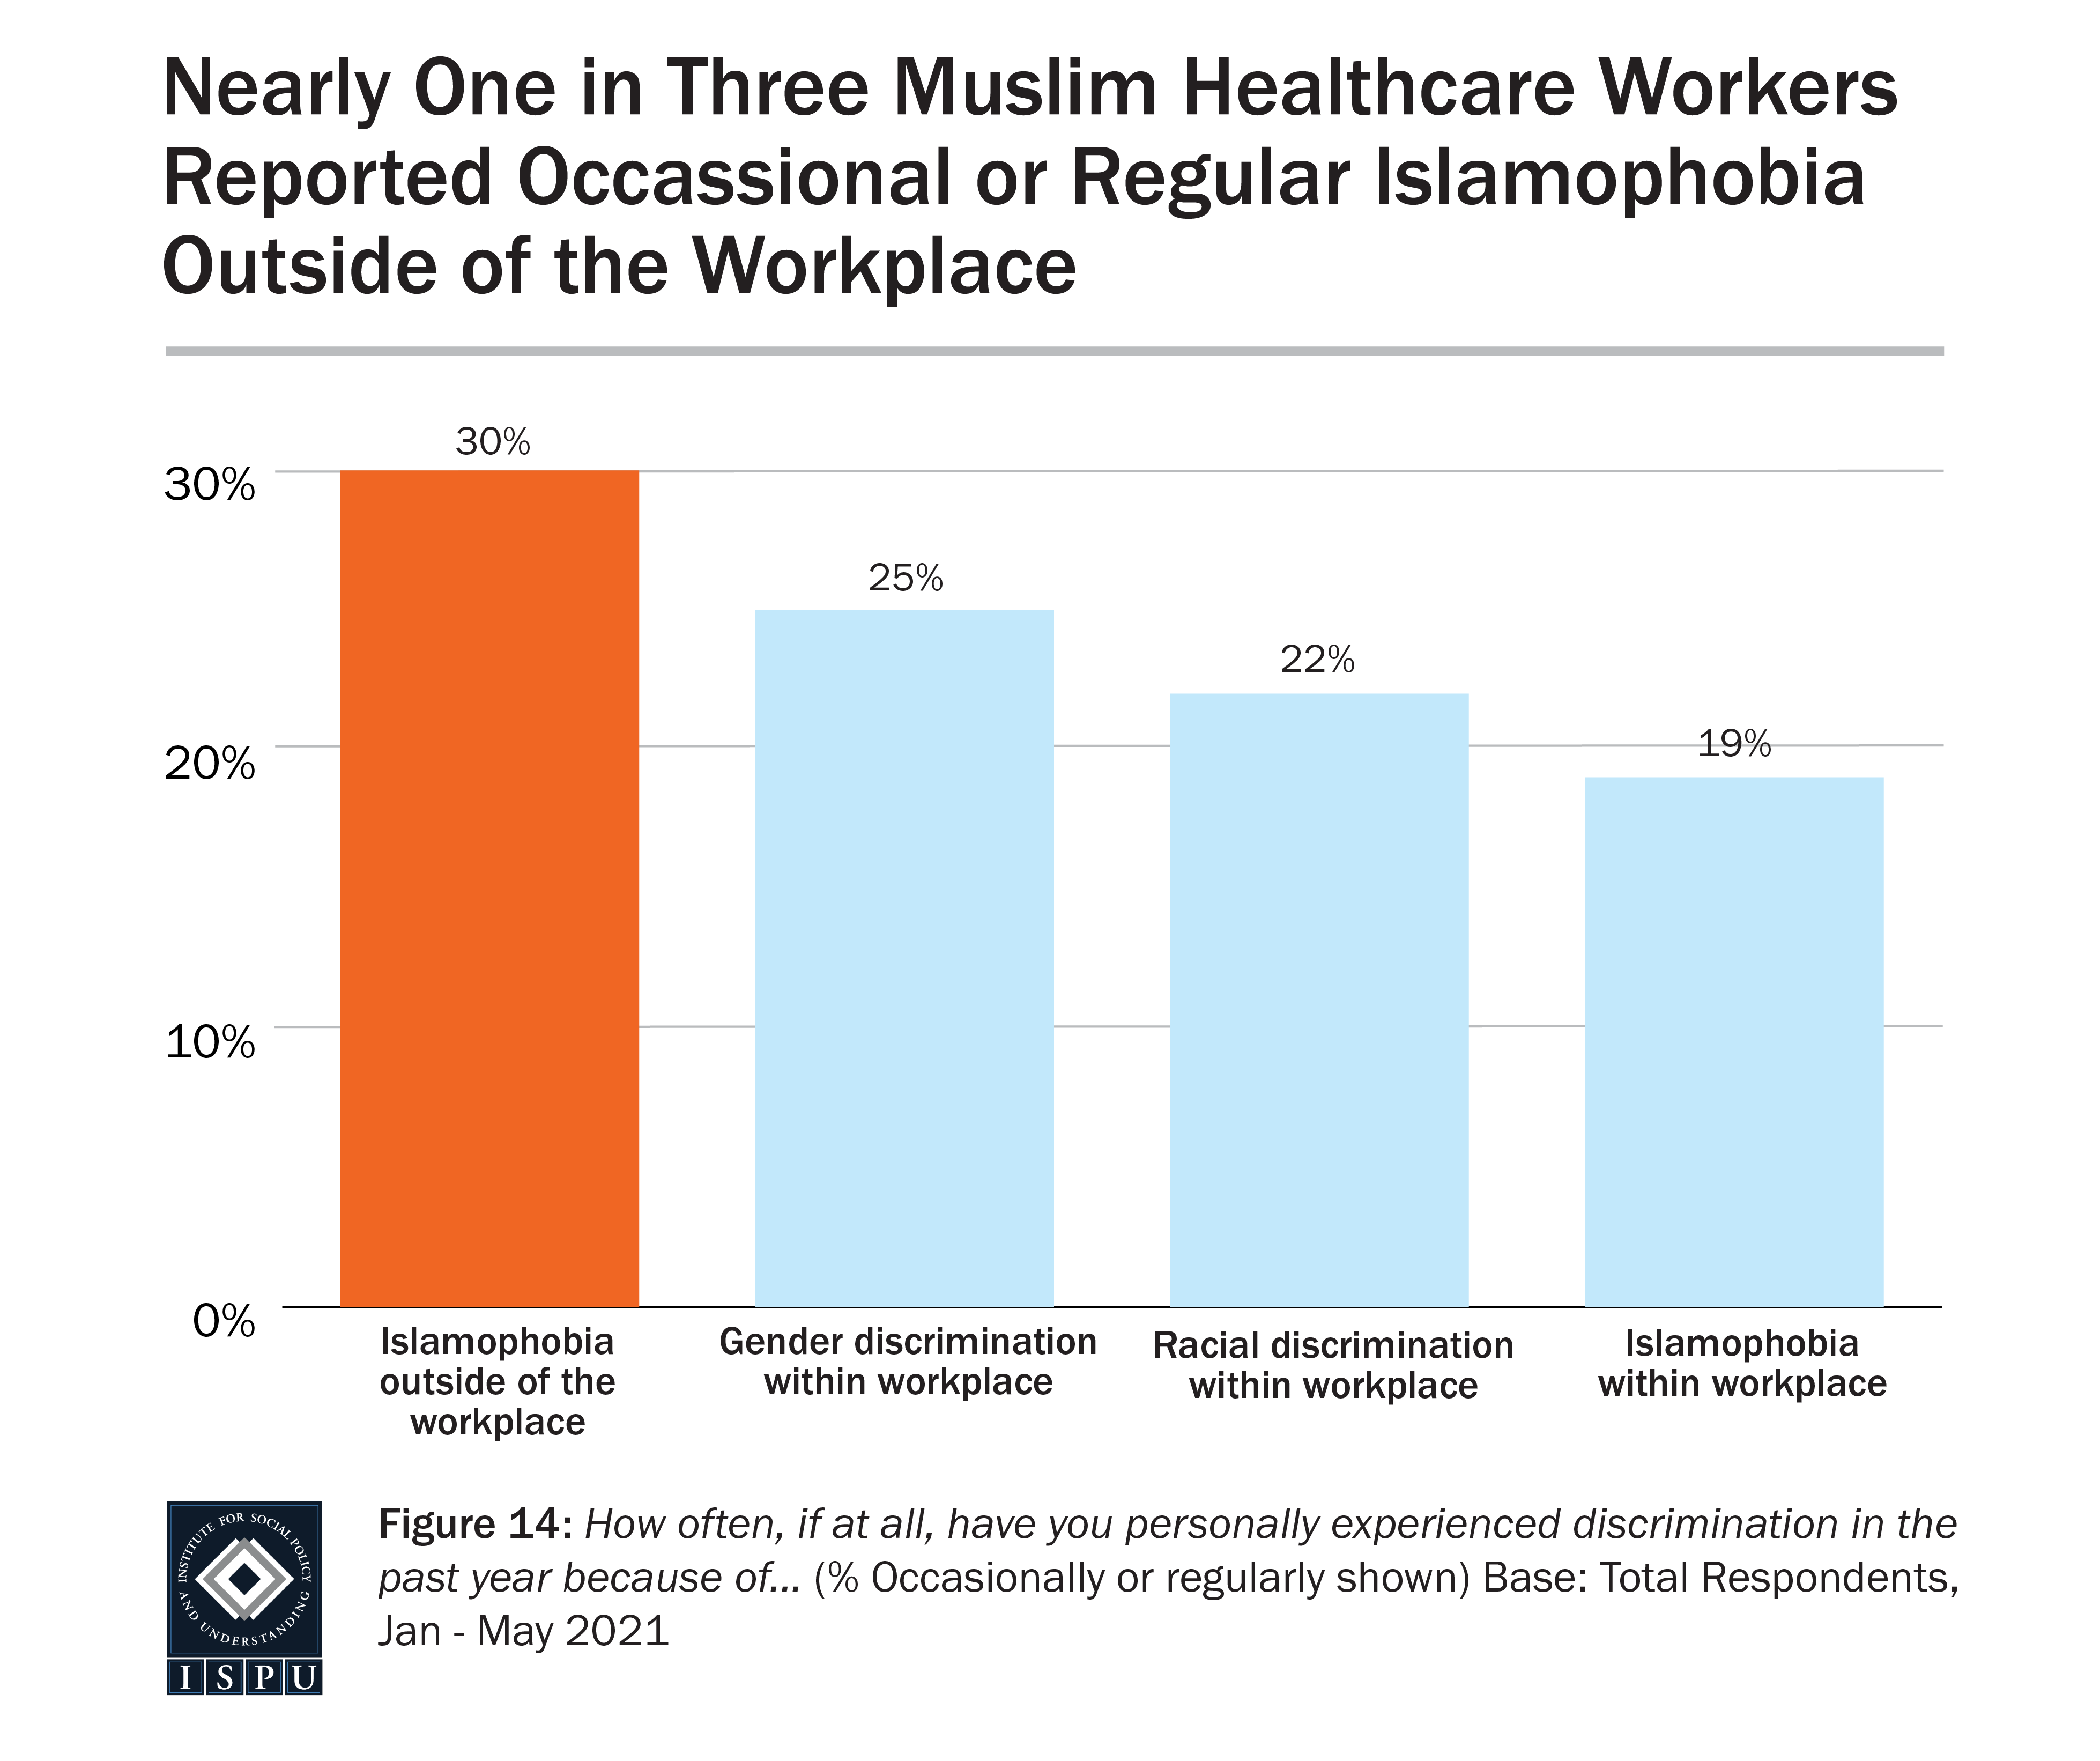 Graph displaying: bar graph showing Muslim healthcare workers experiencing Islamophobia, most commonly outside of the workplace